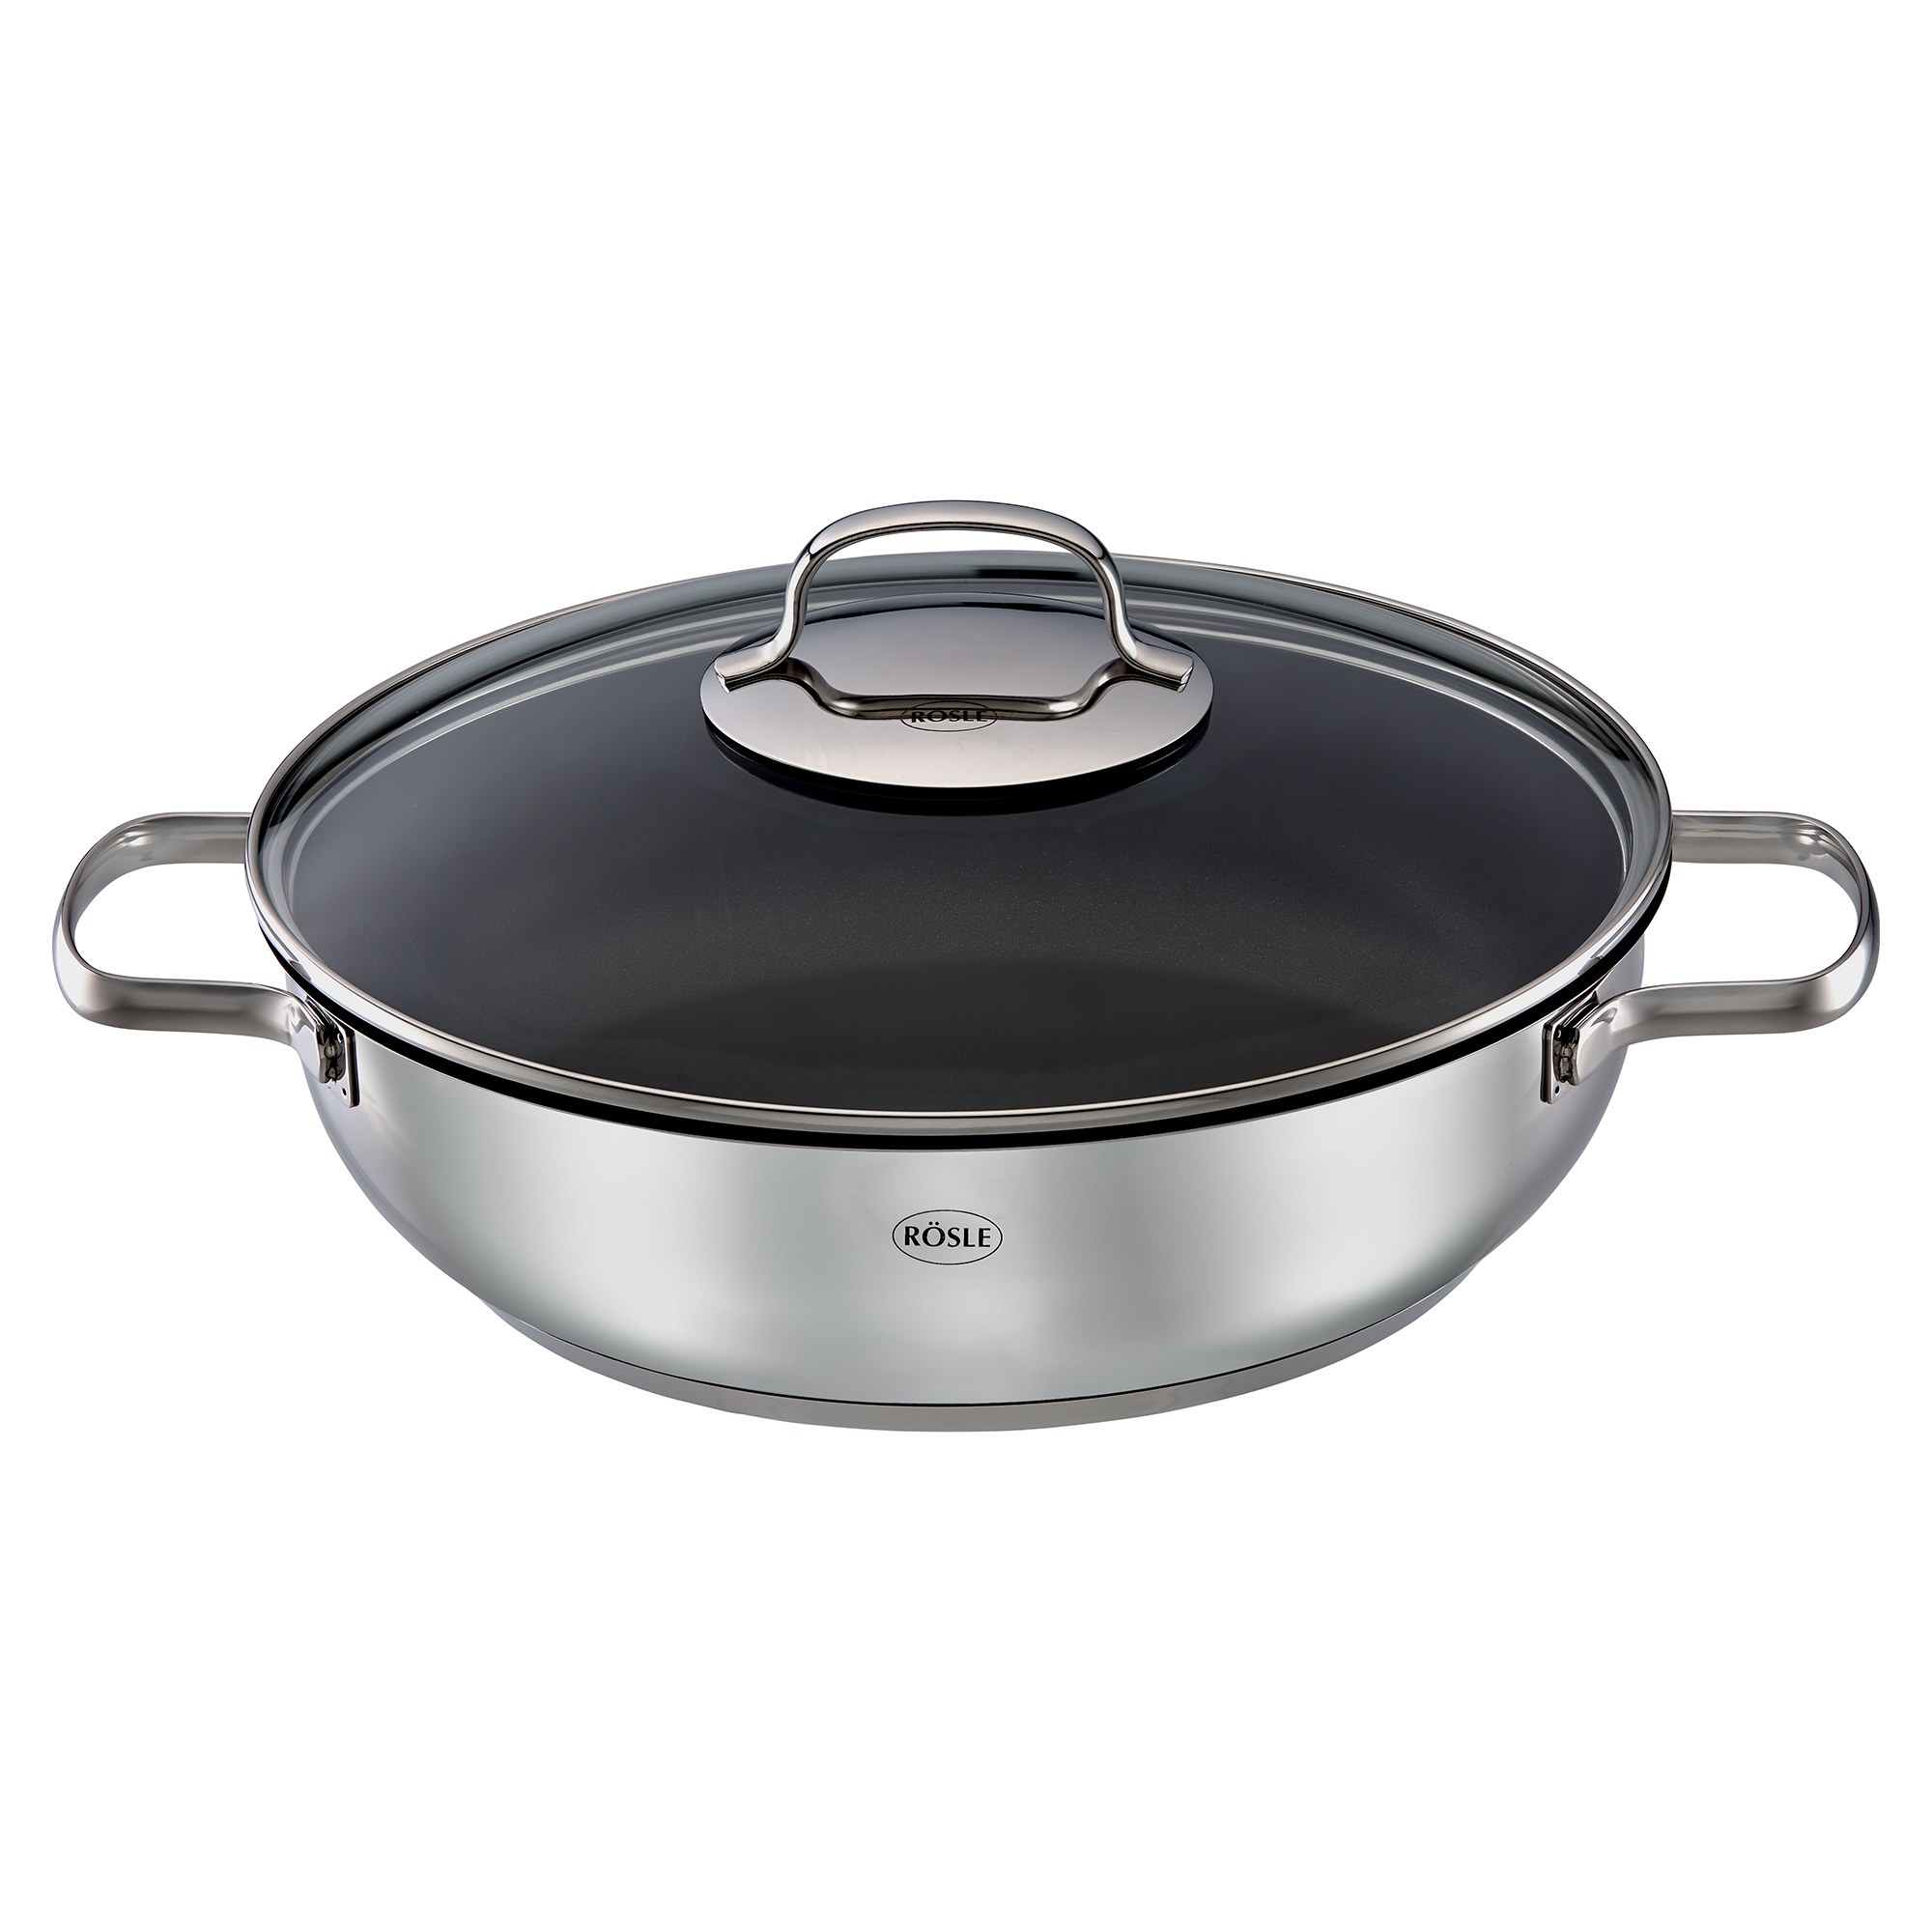 Serving Pan Elegance with non-stick coating Ø 28 cm|11.0 in.